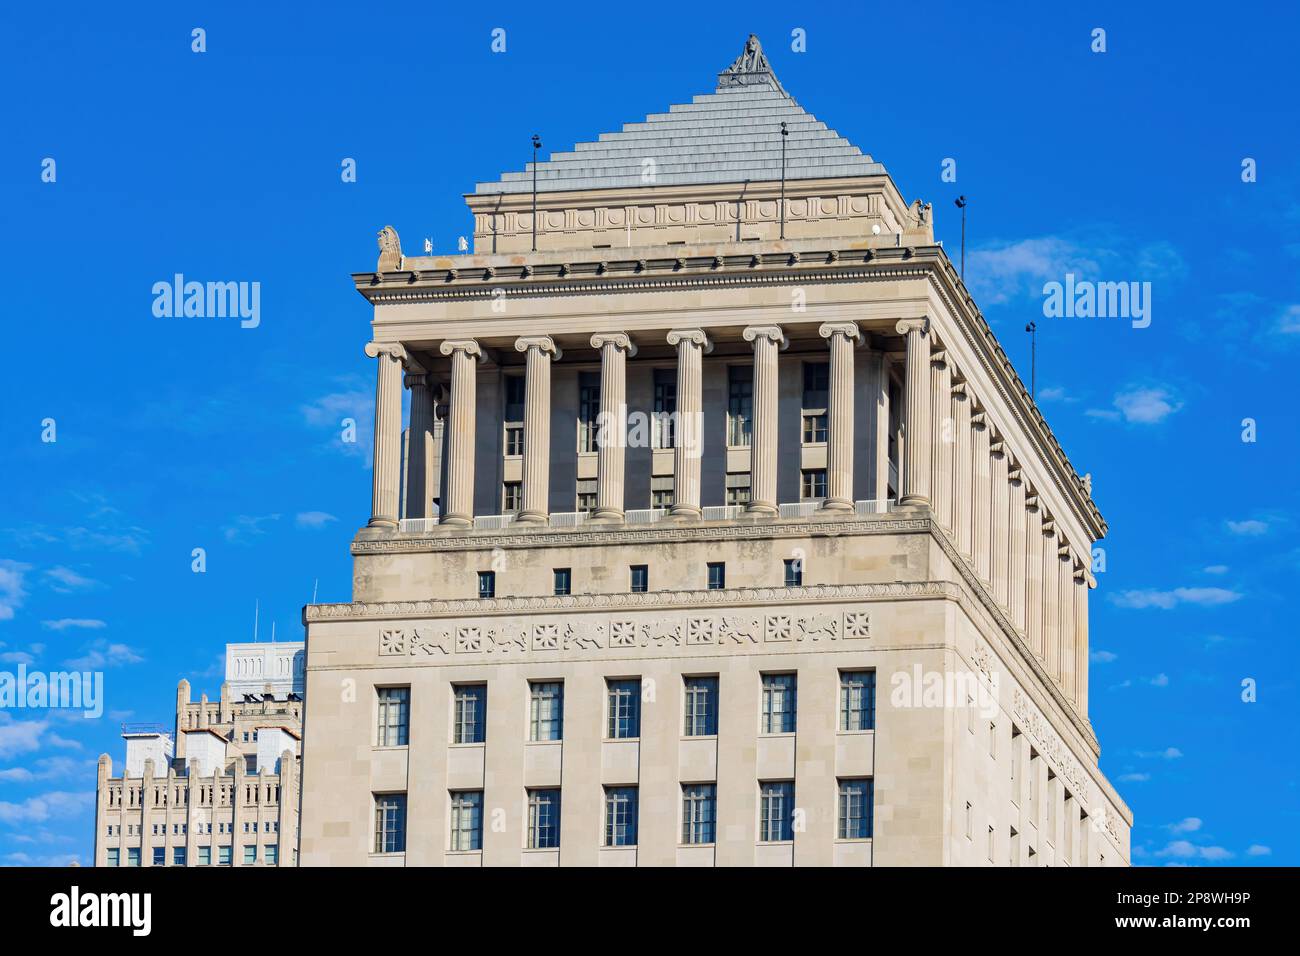 Sunny view of The 22nd Judicial Circuit Court at Missouri Stock Photo